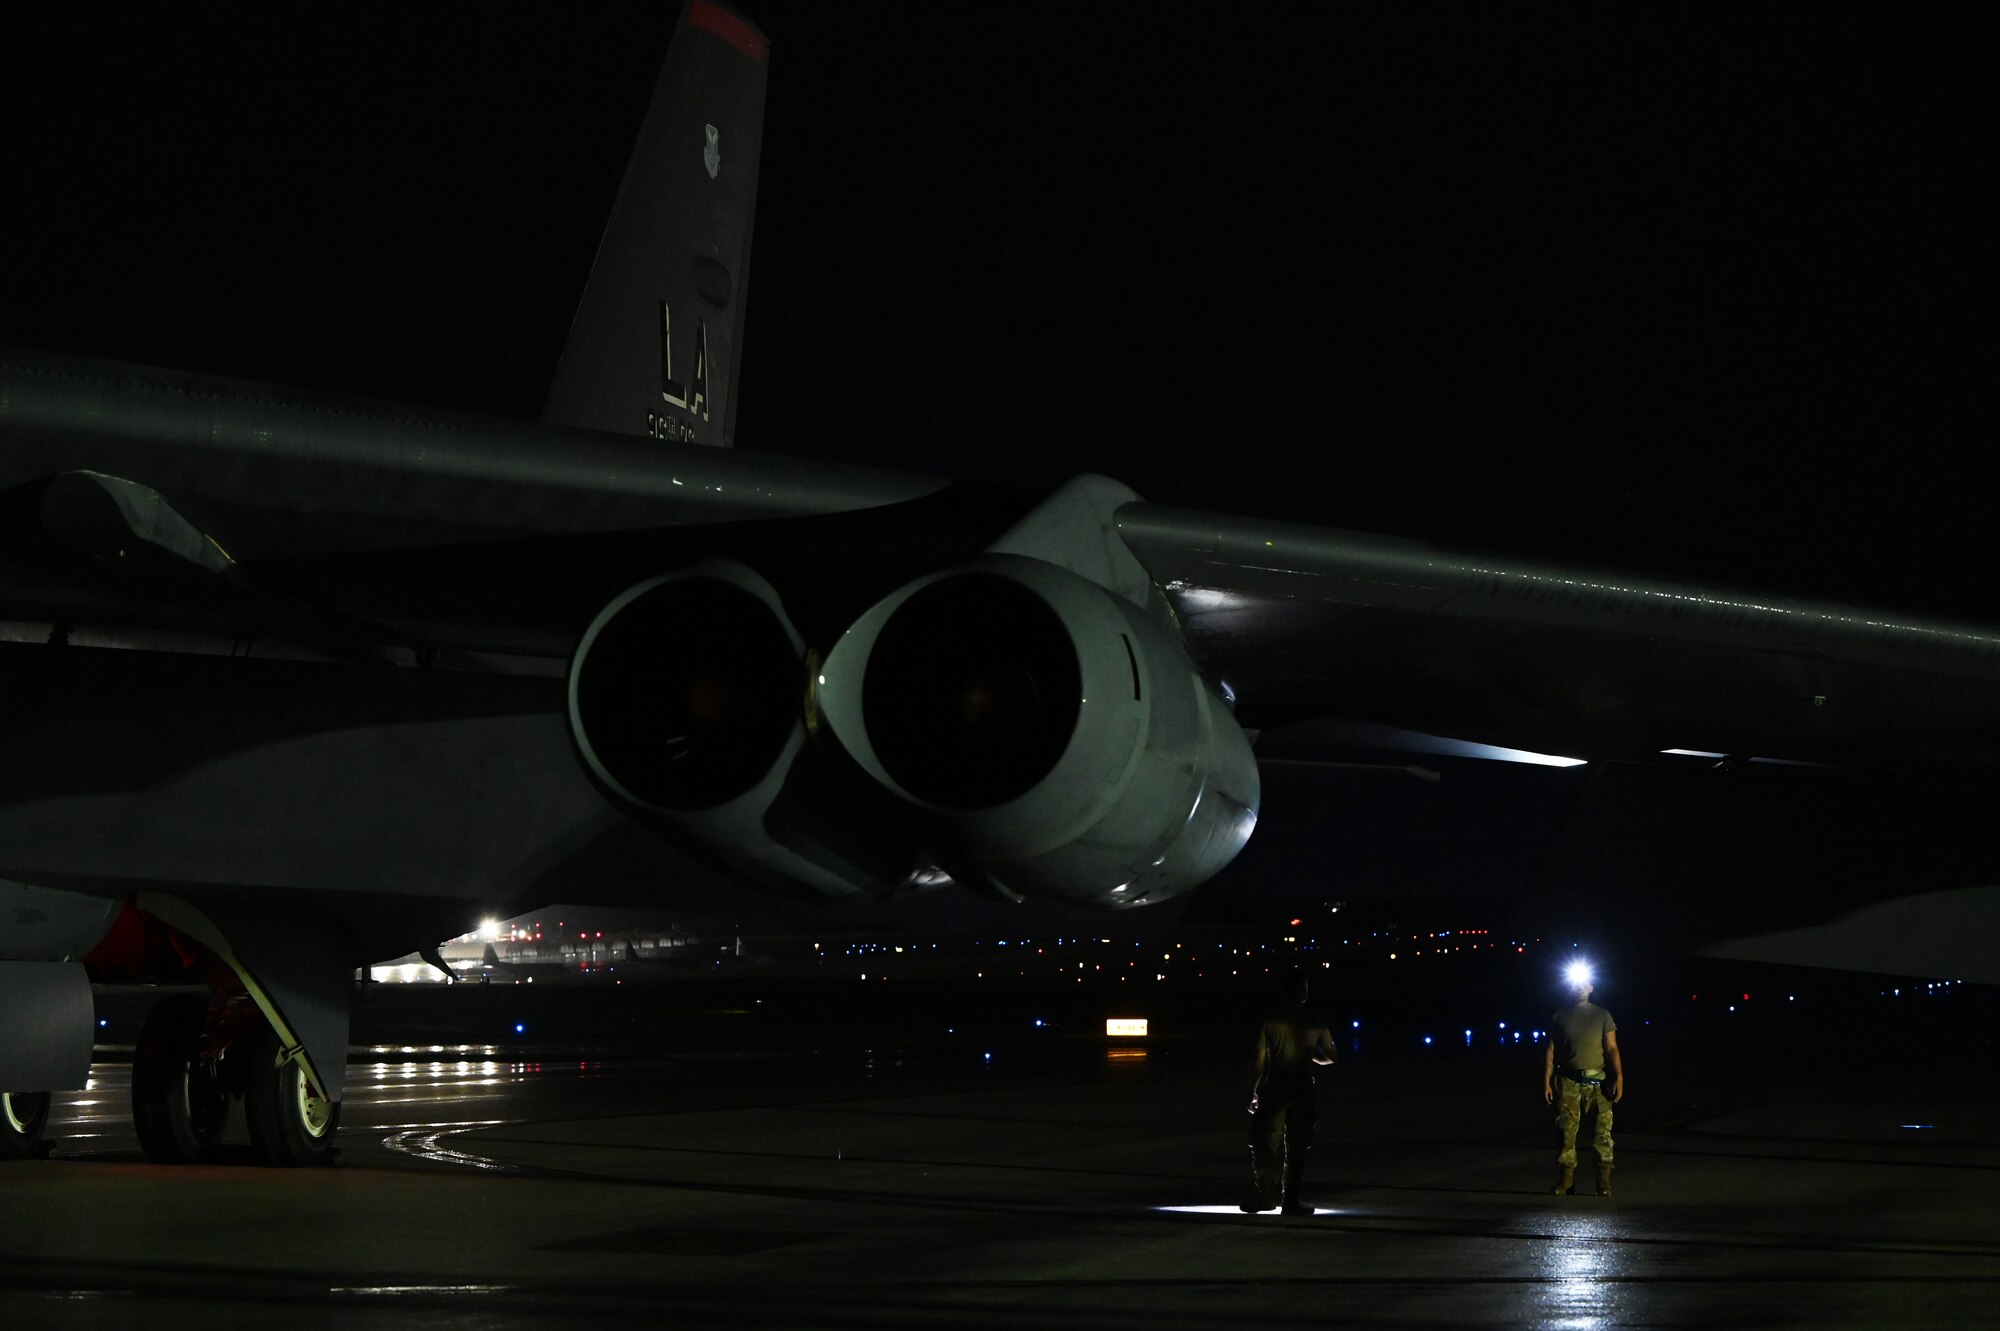 U.S. Air Force Airmen from the 20th Aircraft Maintenance Unit, Barksdale Air Force Base, Louisiana, inspect a B-52 Stratofortress upon arrival at Andersen Air Force Base, Guam, Aug. 26, 2021. This deployment allows aircrews and support personnel to conduct theater integration and to improve bomber interoperability with allies and partners. (U.S. Air Force photo by Staff Sgt. Alysia Blake)